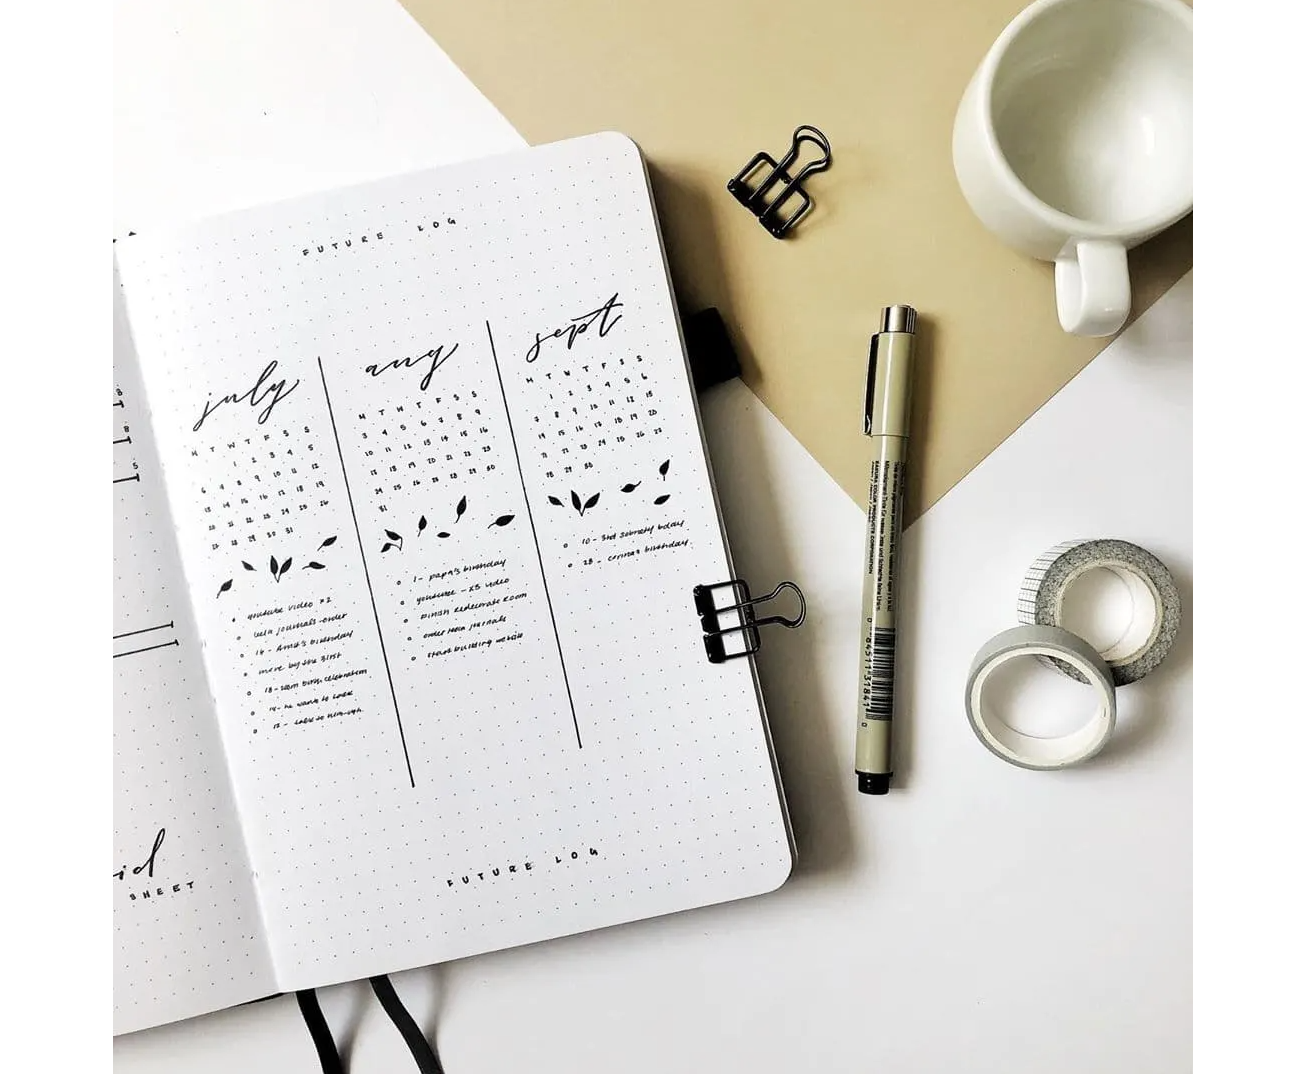 Top 10 Black Page Bullet Journal Spreads – NotebookTherapy